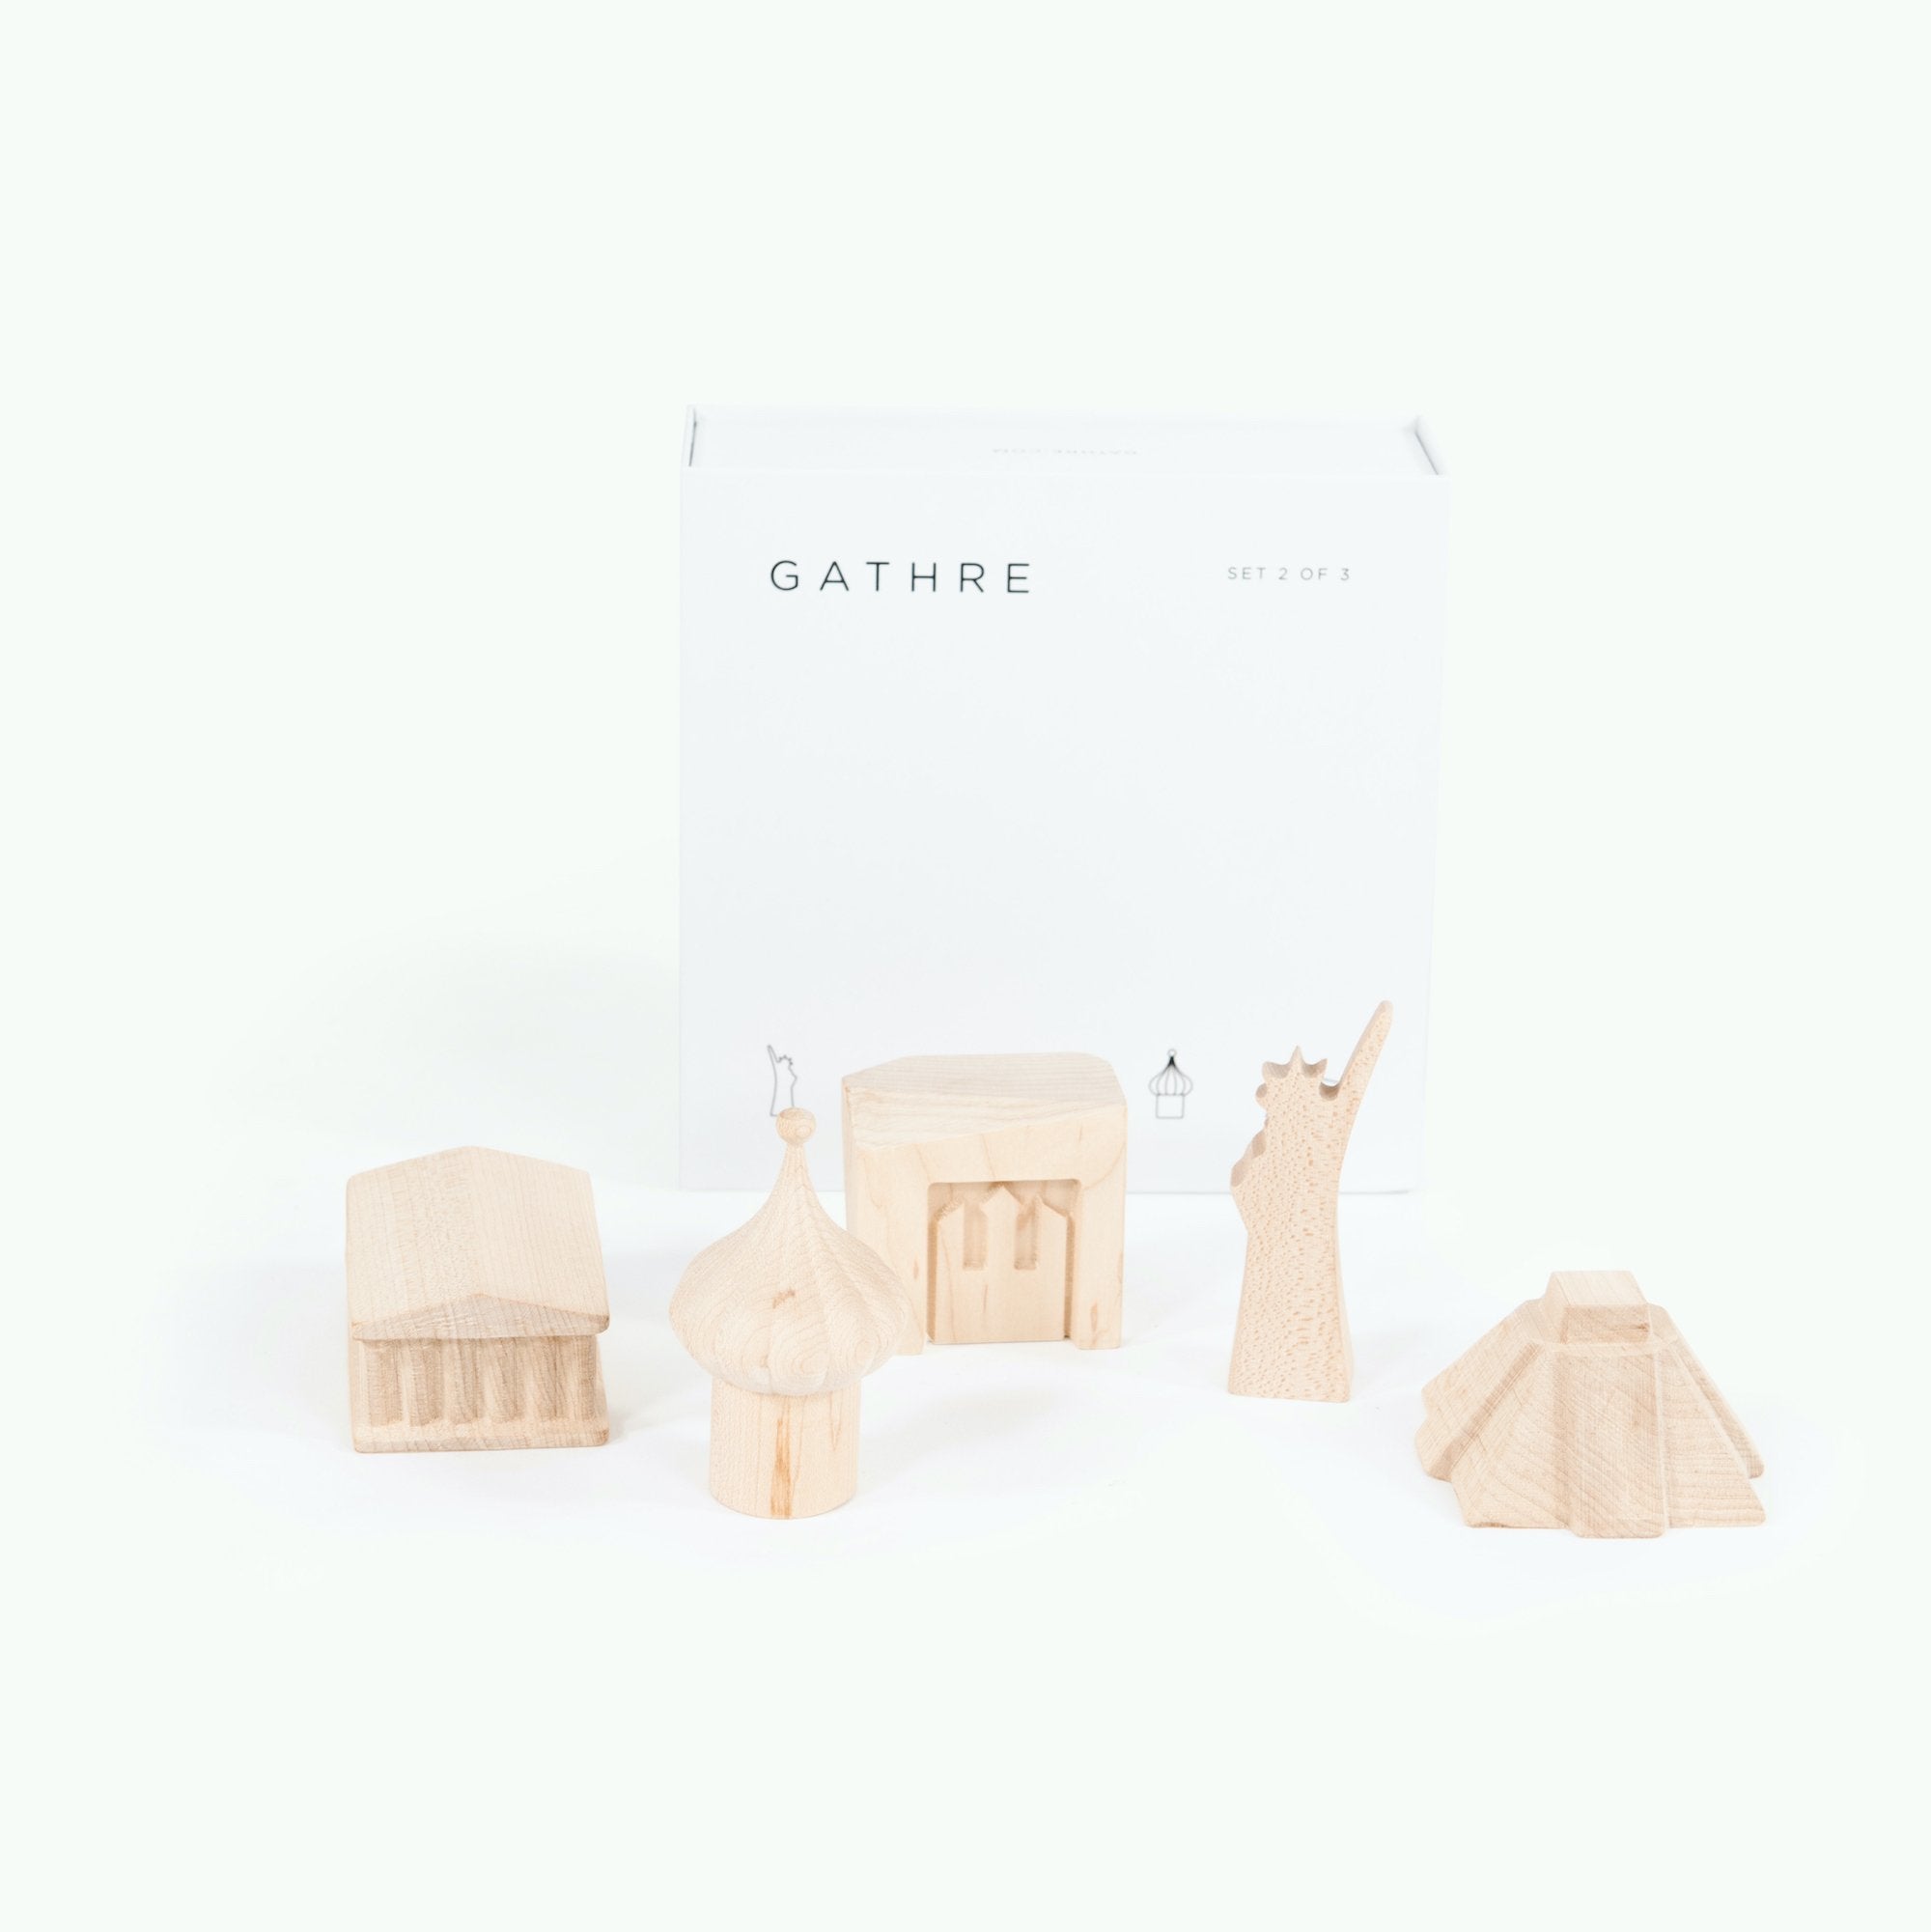 Statue of Liberty (on sale)@Statue of Liberty Wooden Landmarks 